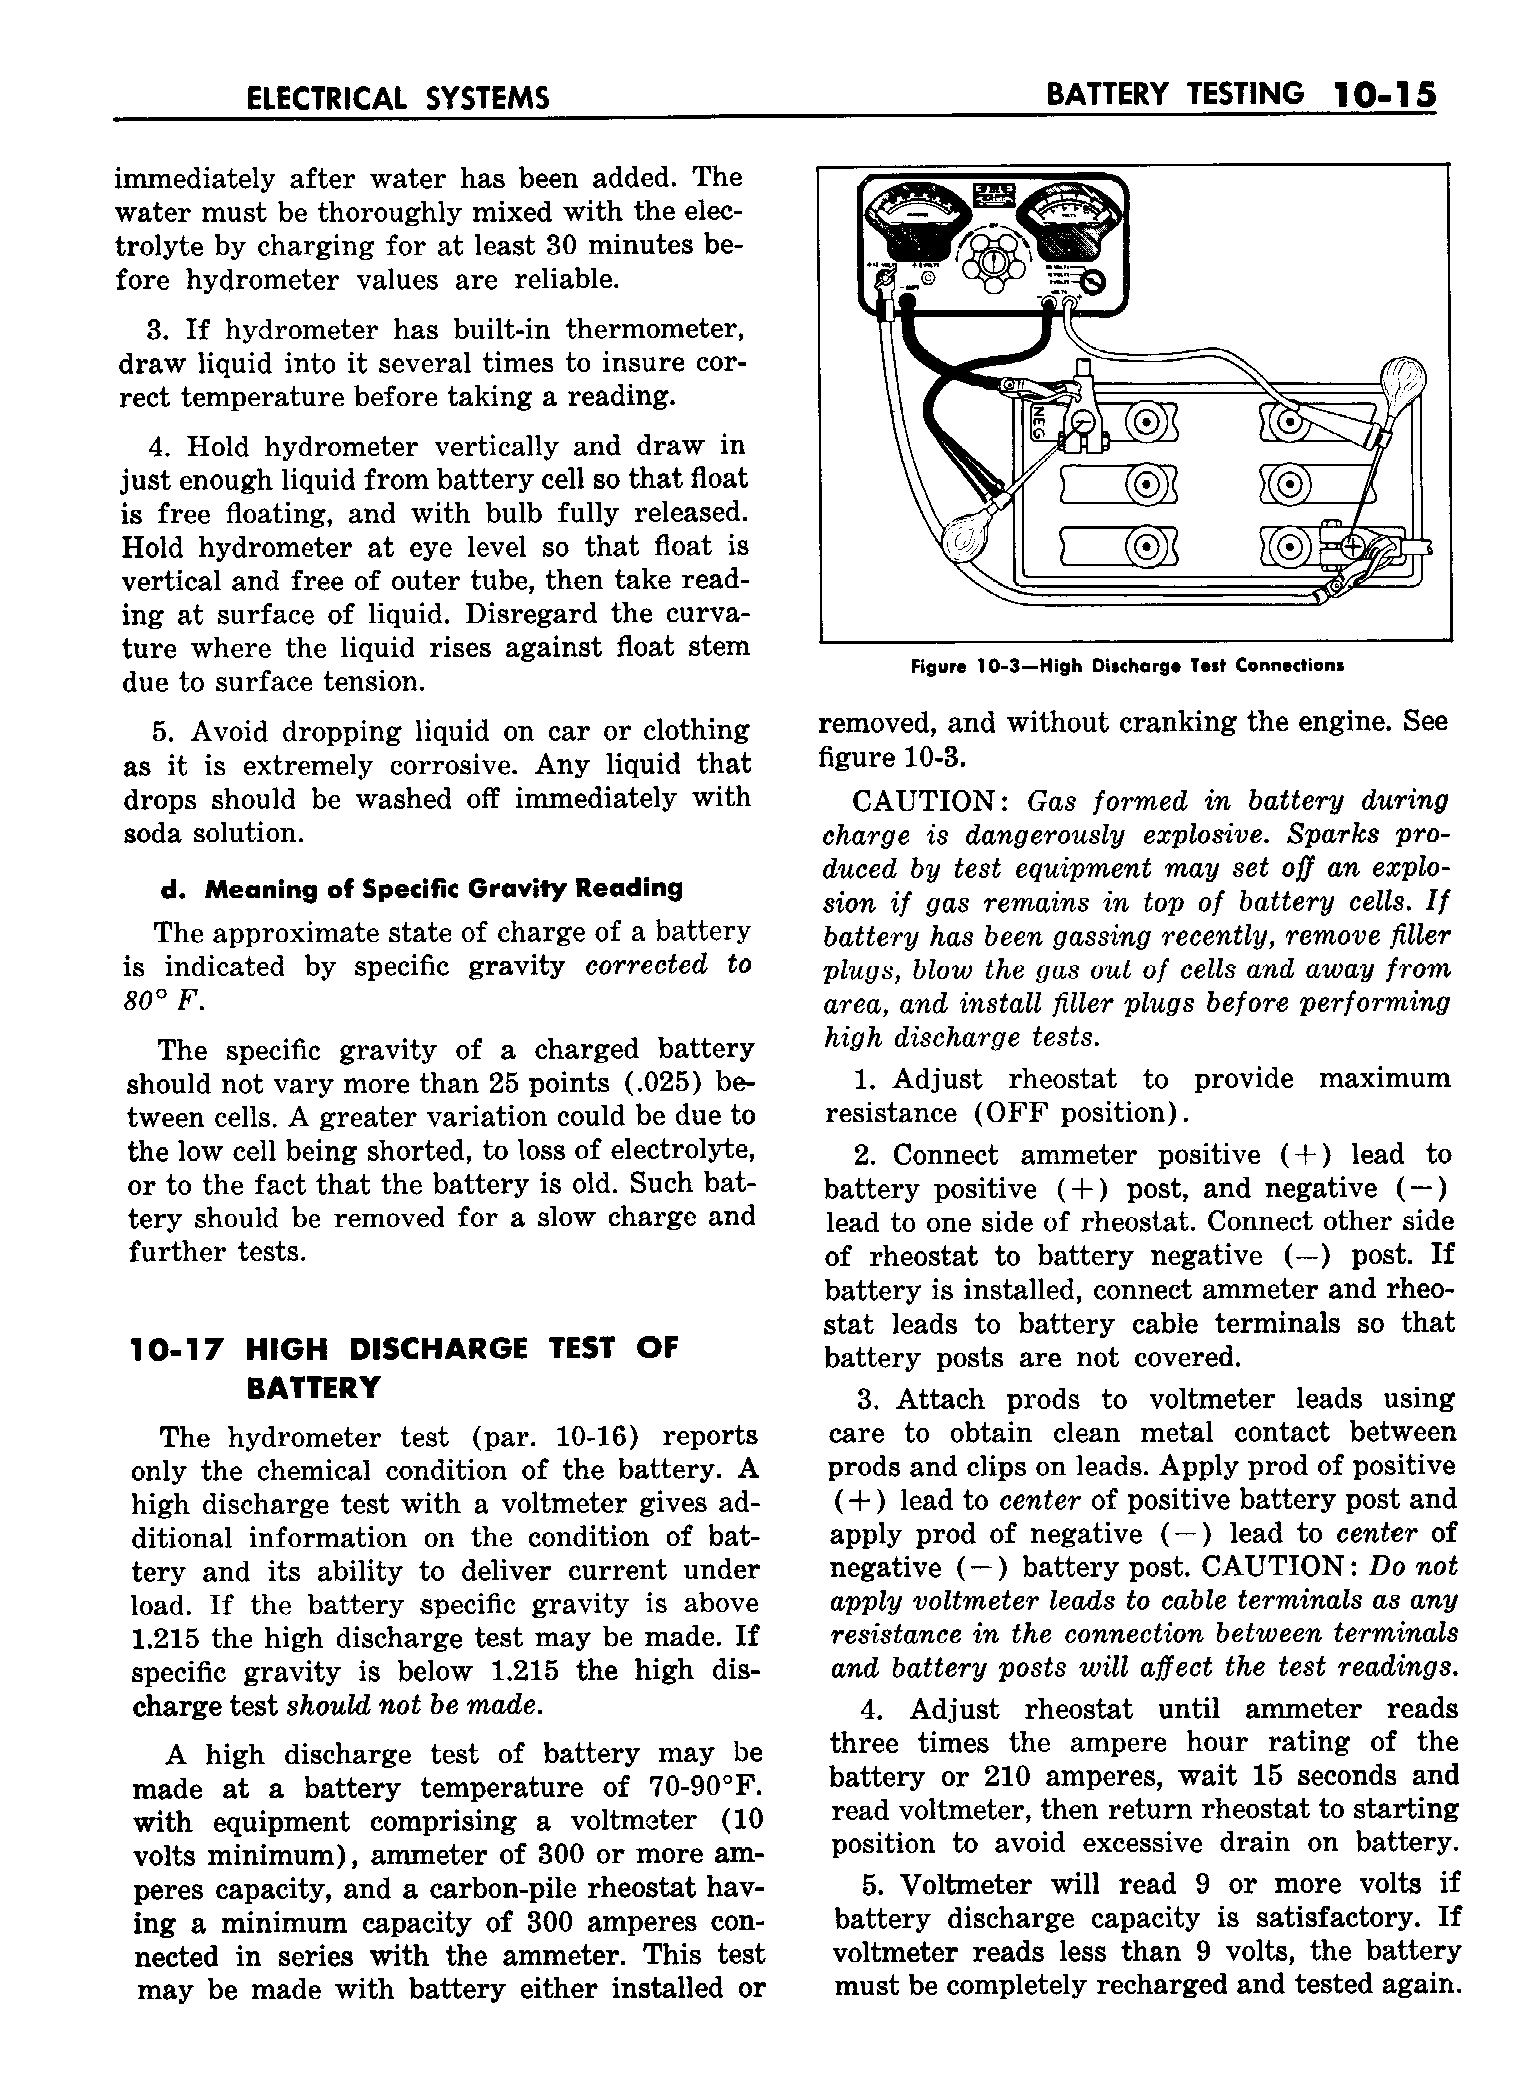 n_11 1958 Buick Shop Manual - Electrical Systems_15.jpg